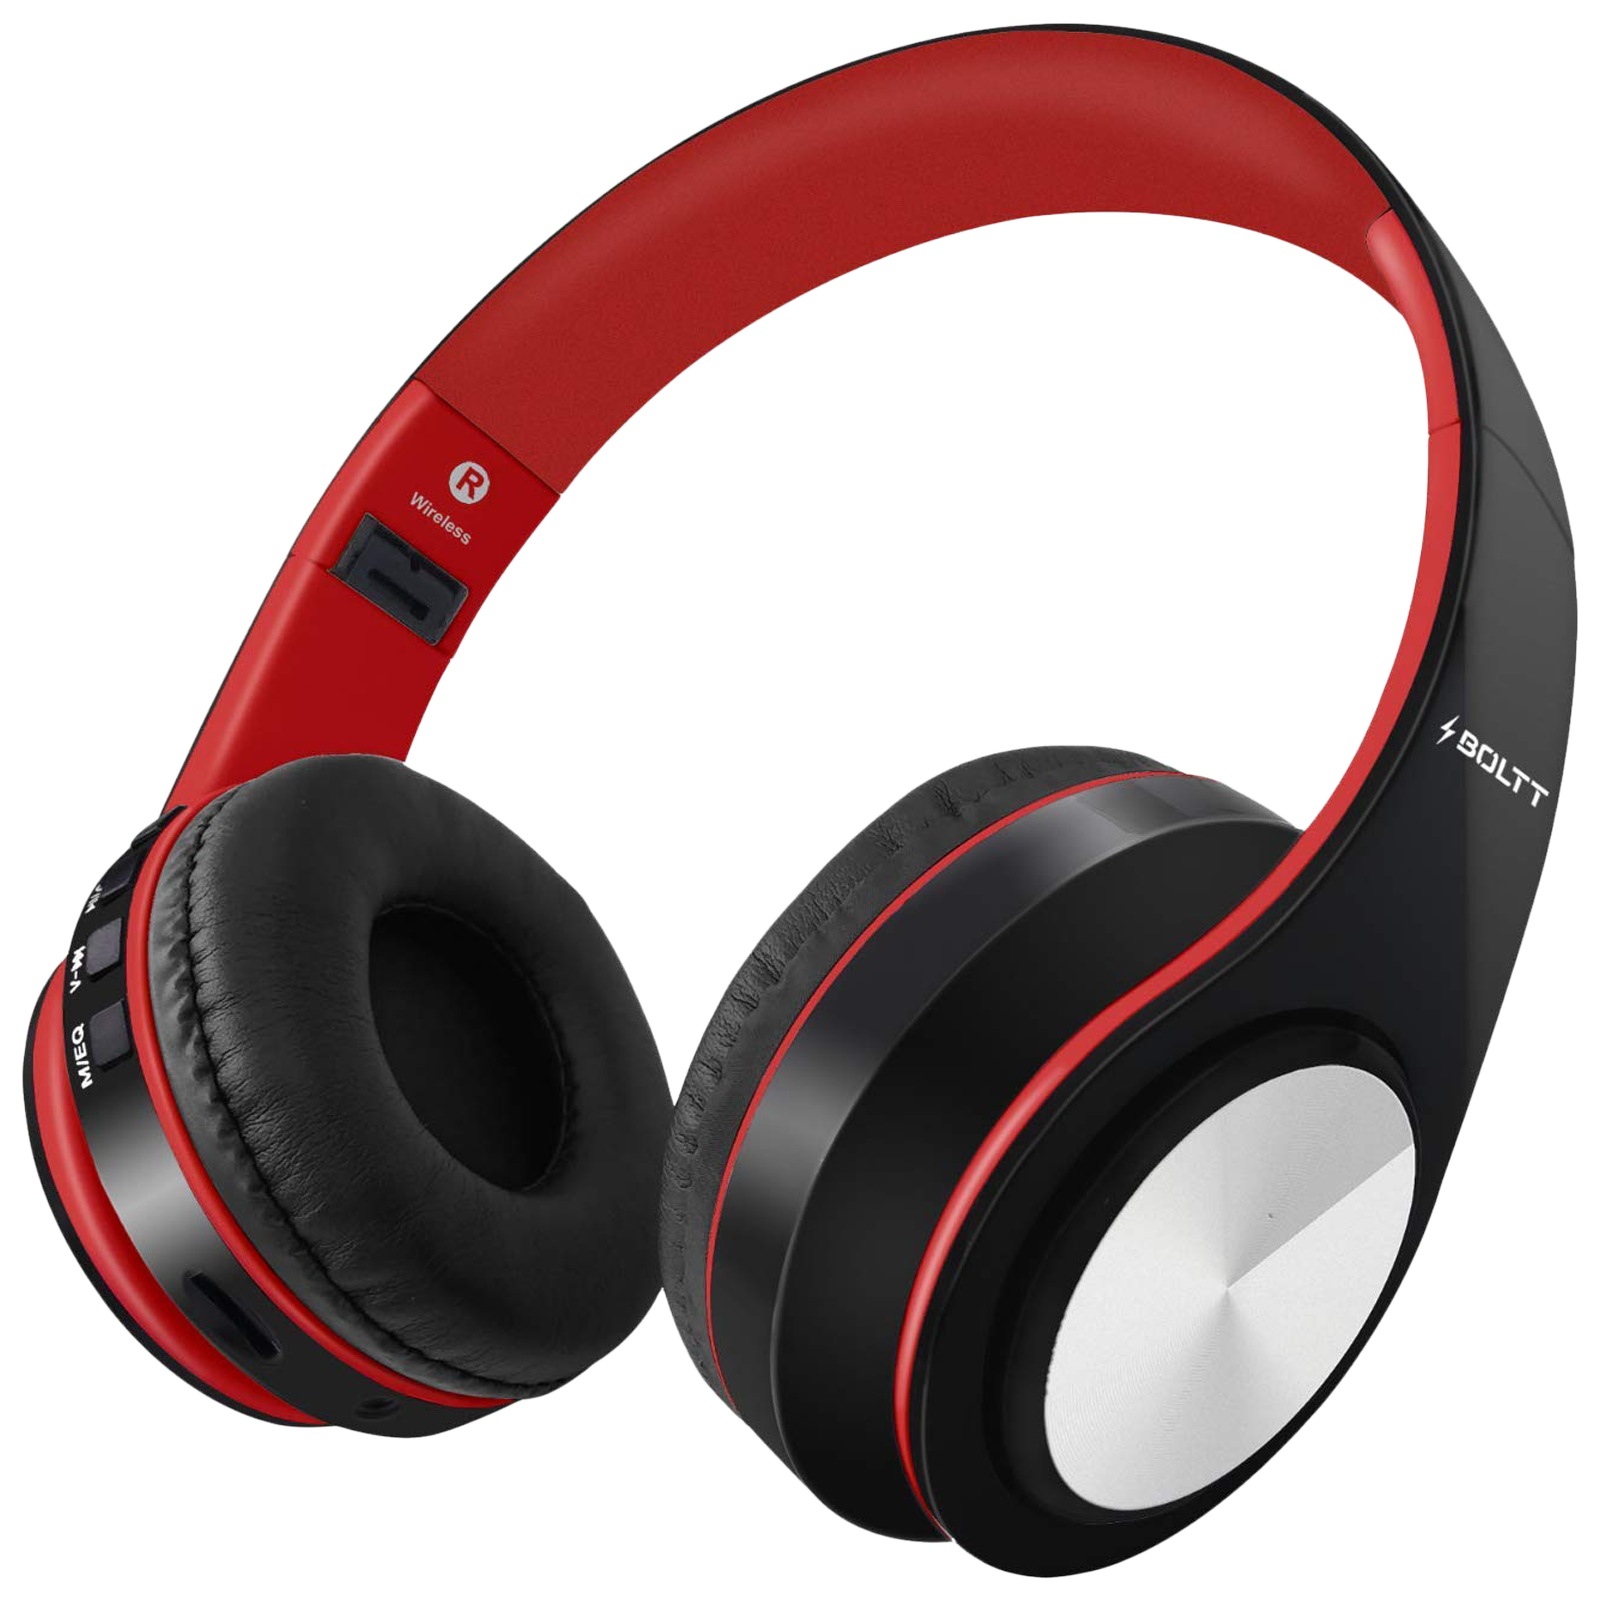 fire-boltt - Fire Boltt BH1001 On-Ear noise Isolation Wireless Headphone with Mic (Bluetooth 5.0, Exceptional Sound with Great Bass, BH1000, Red)